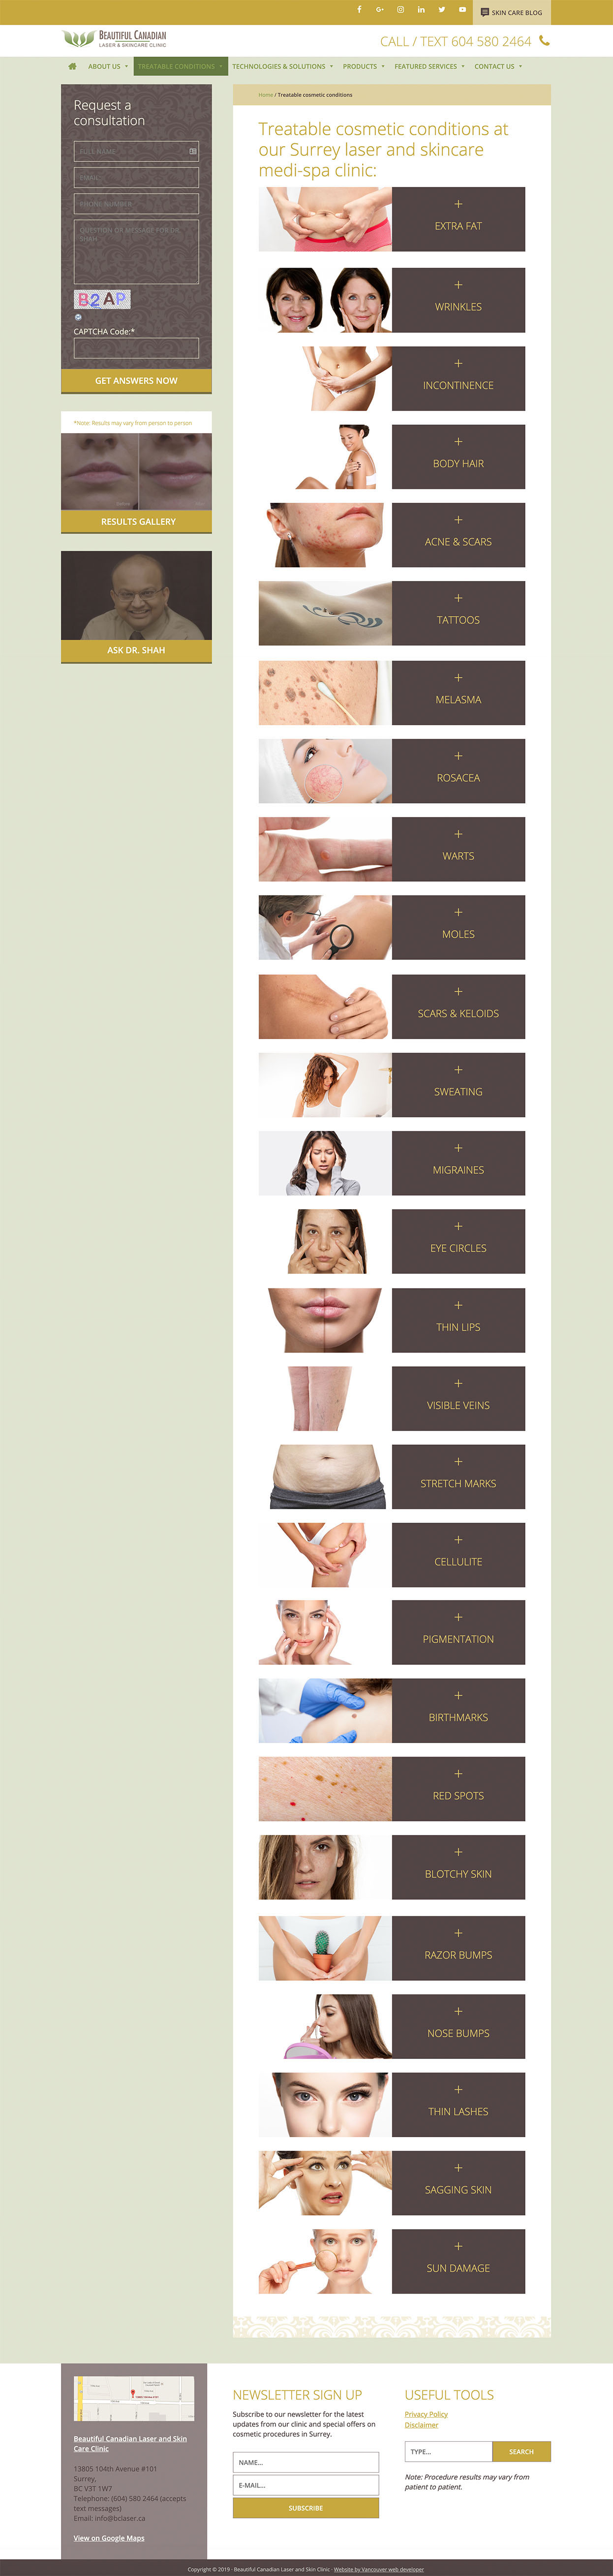 cosmetic medical spa web design for conditions page long view